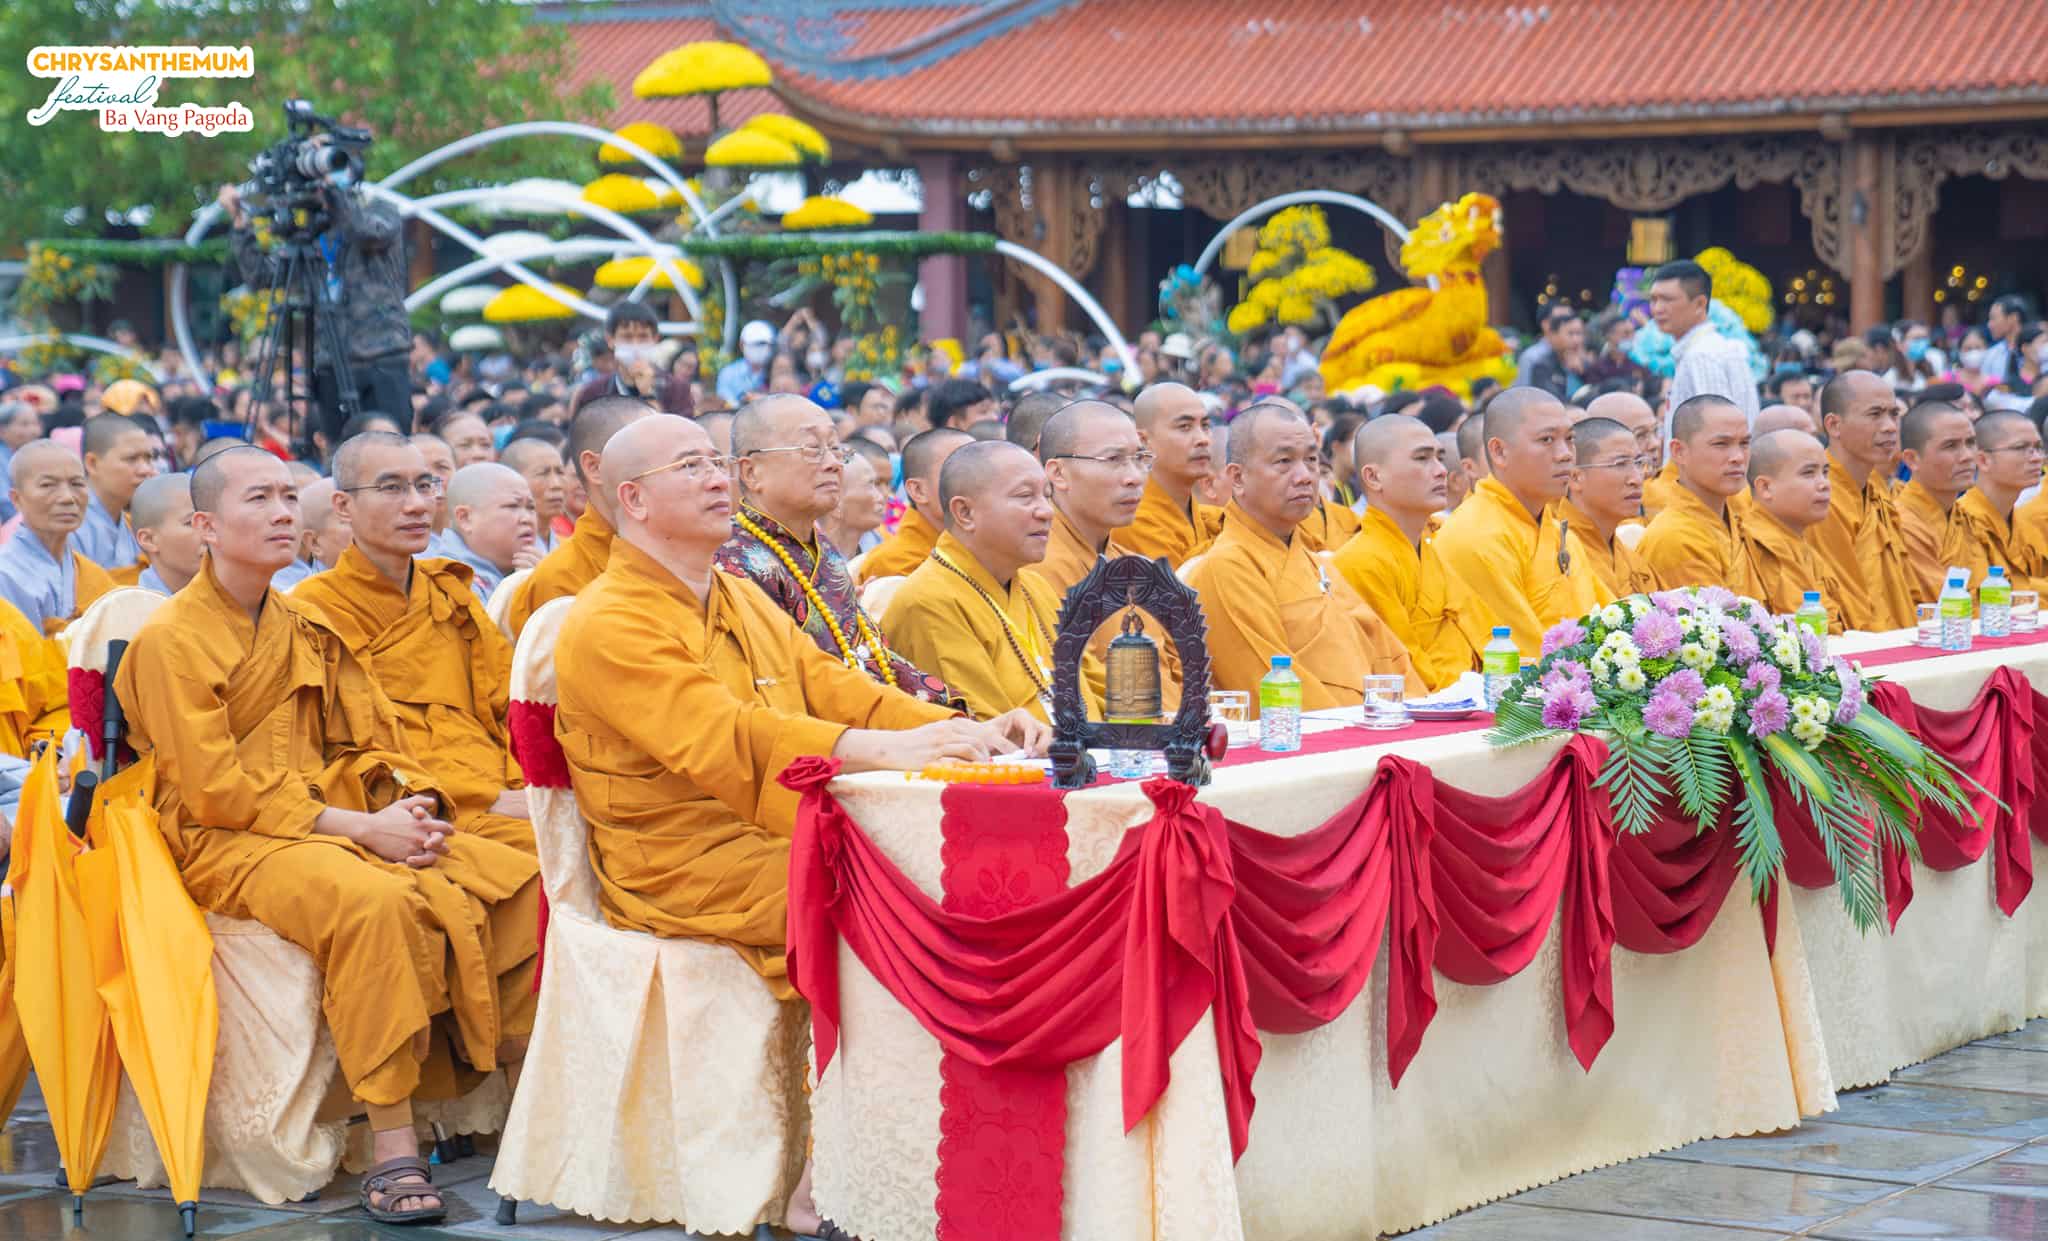 Thay Thich Truc Thai Minh and Monks at the Opening Ceremony of Chrysanthemum Festival 2020 at Ba Vang Pagoda.